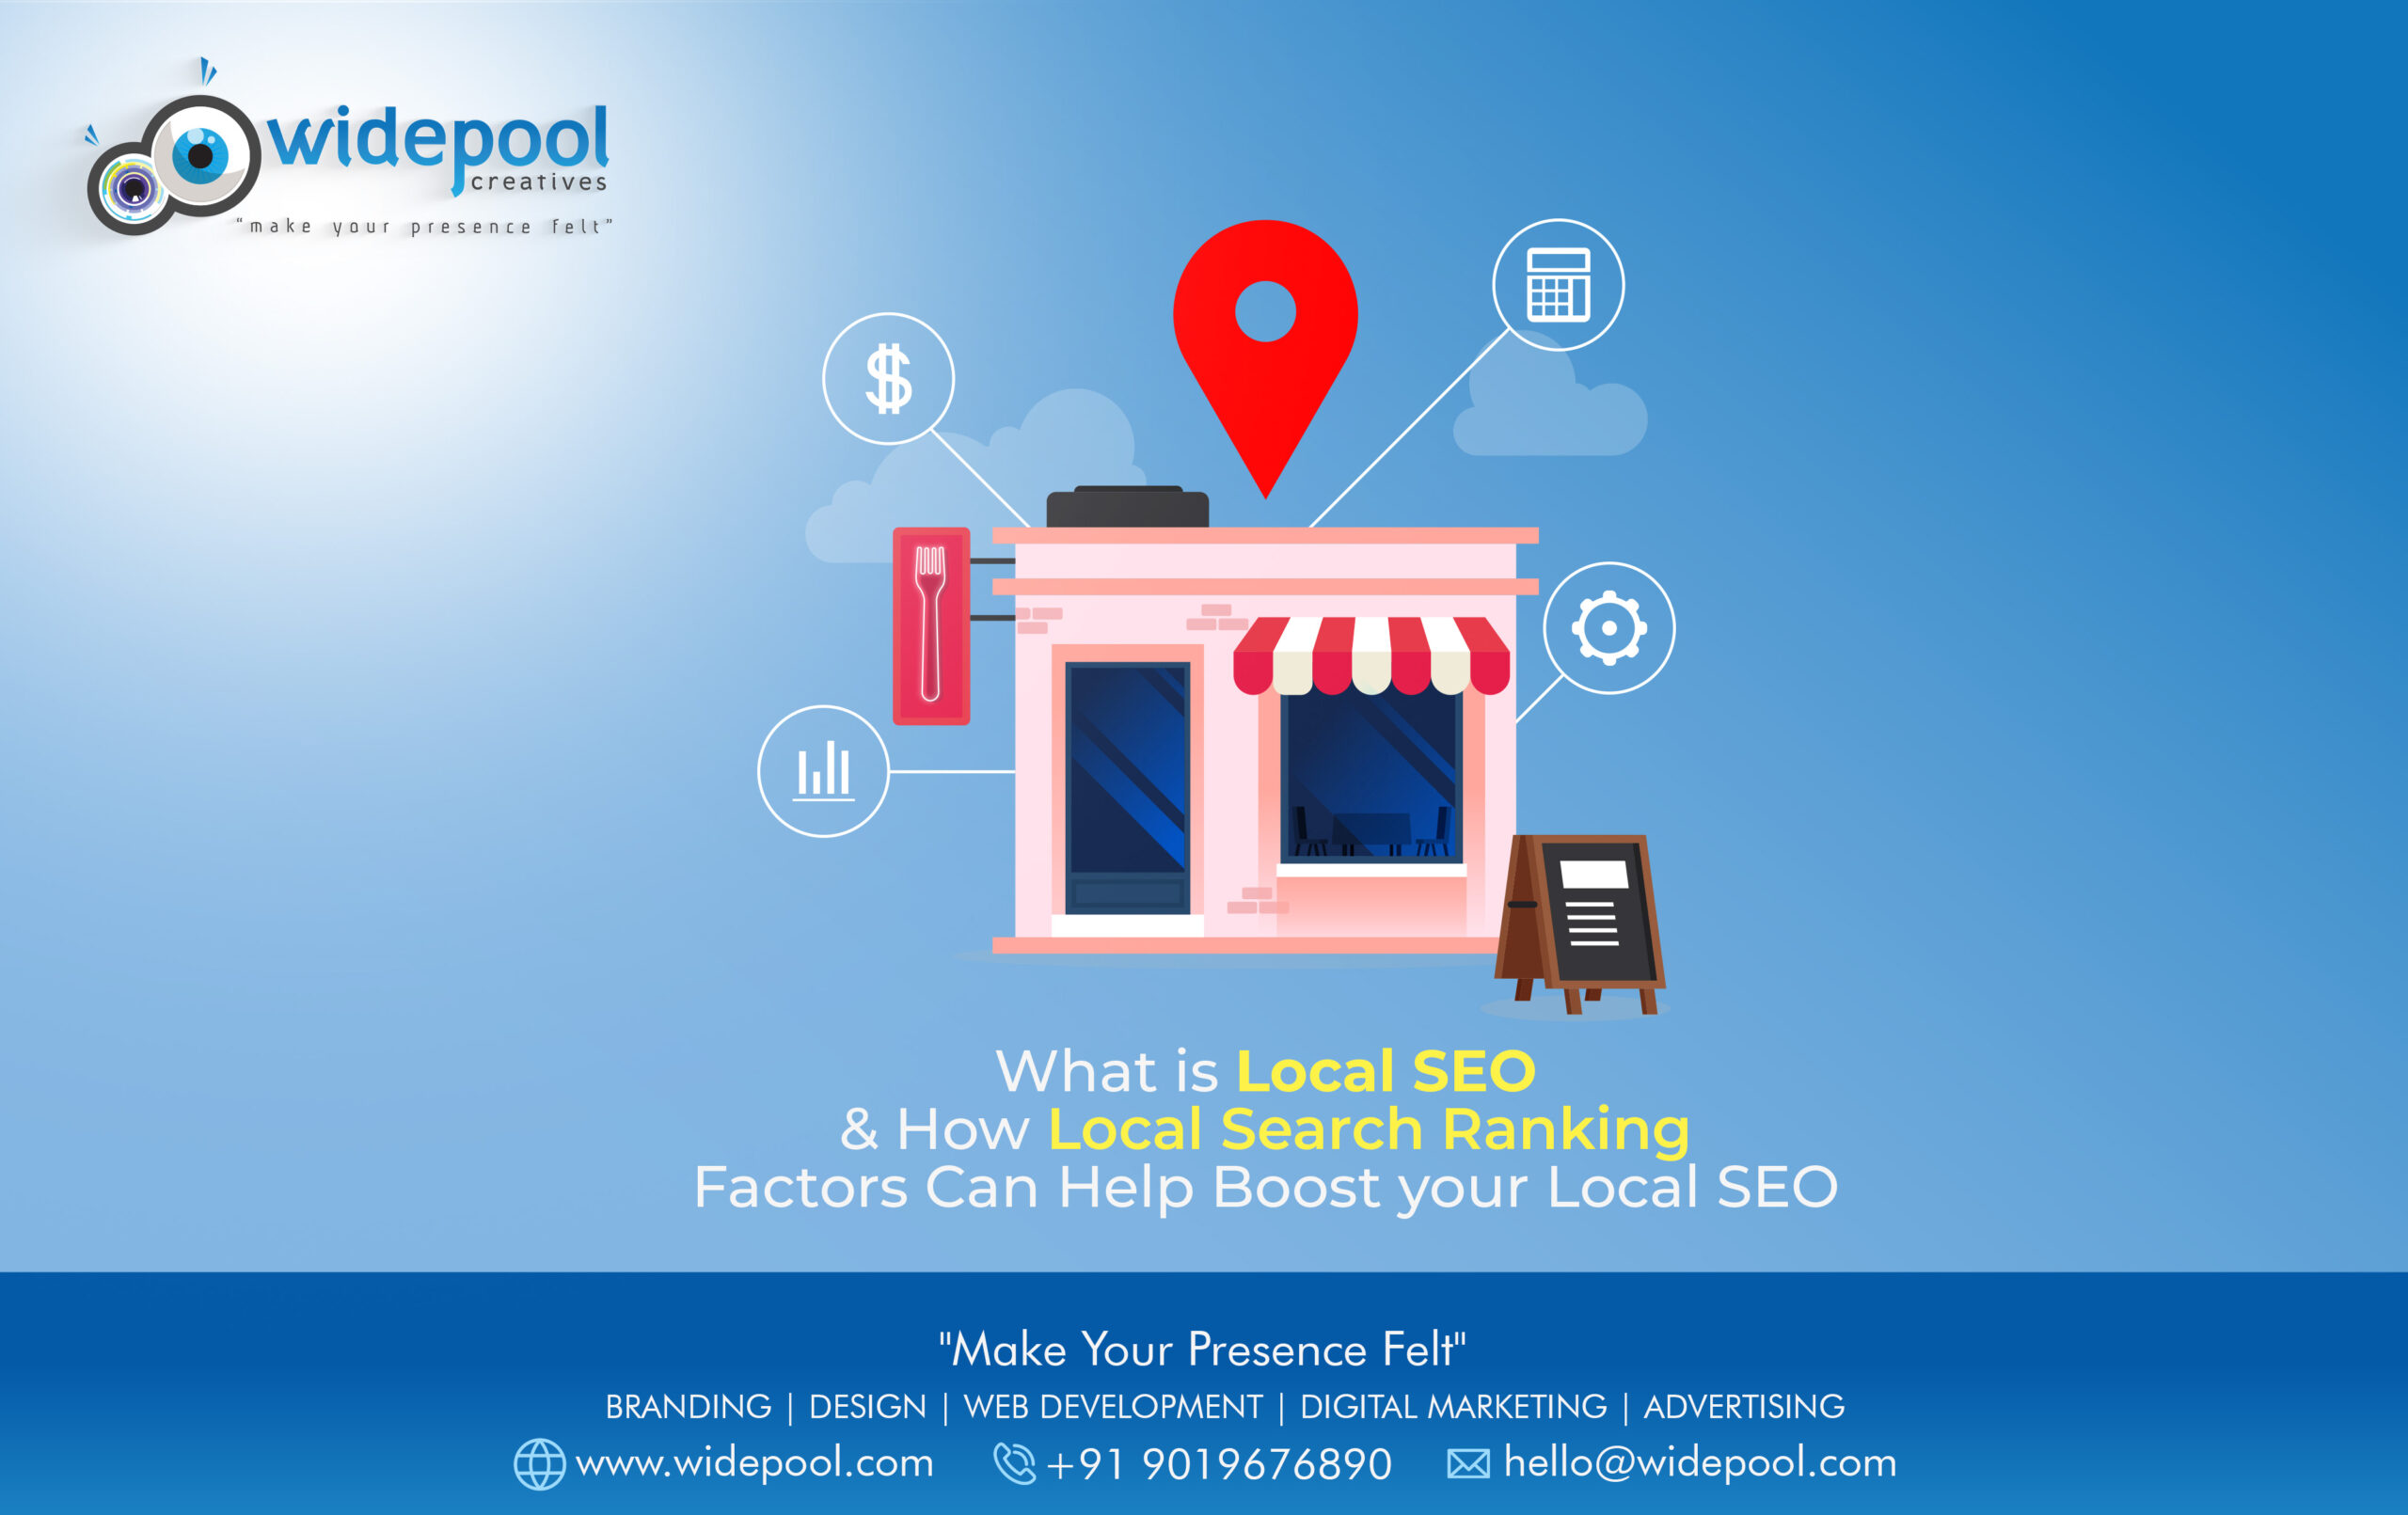 What is Local SEO & How Local Search Ranking Factors Can Help Boost your Local SEO?